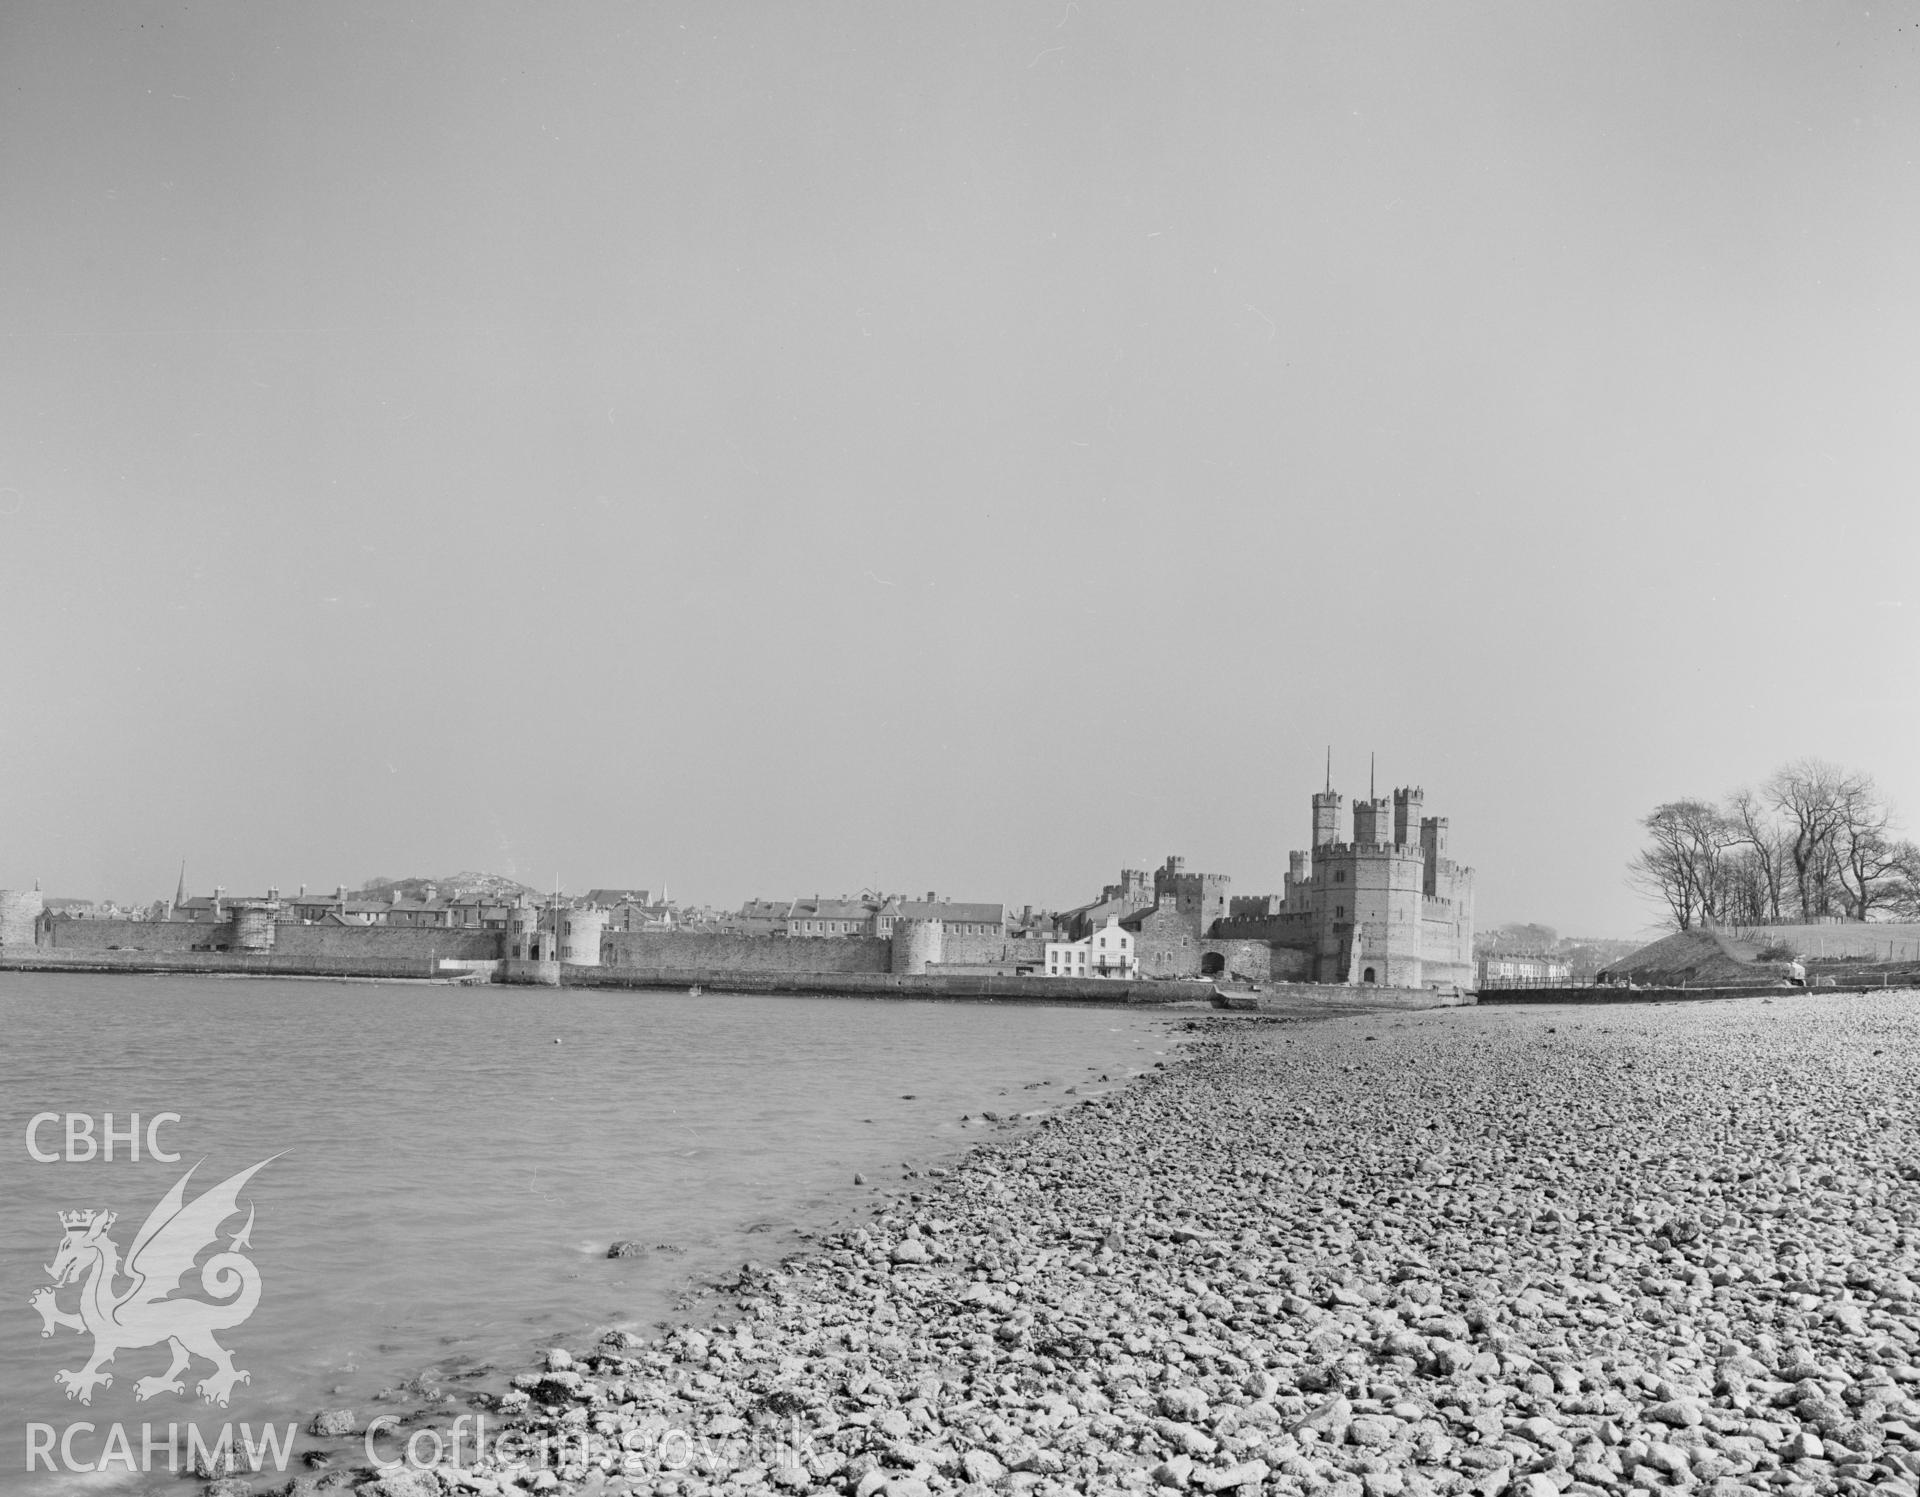 Digital copy of a black and white negative showing a view of Caernarfon Castle, from the Central Office of Information.